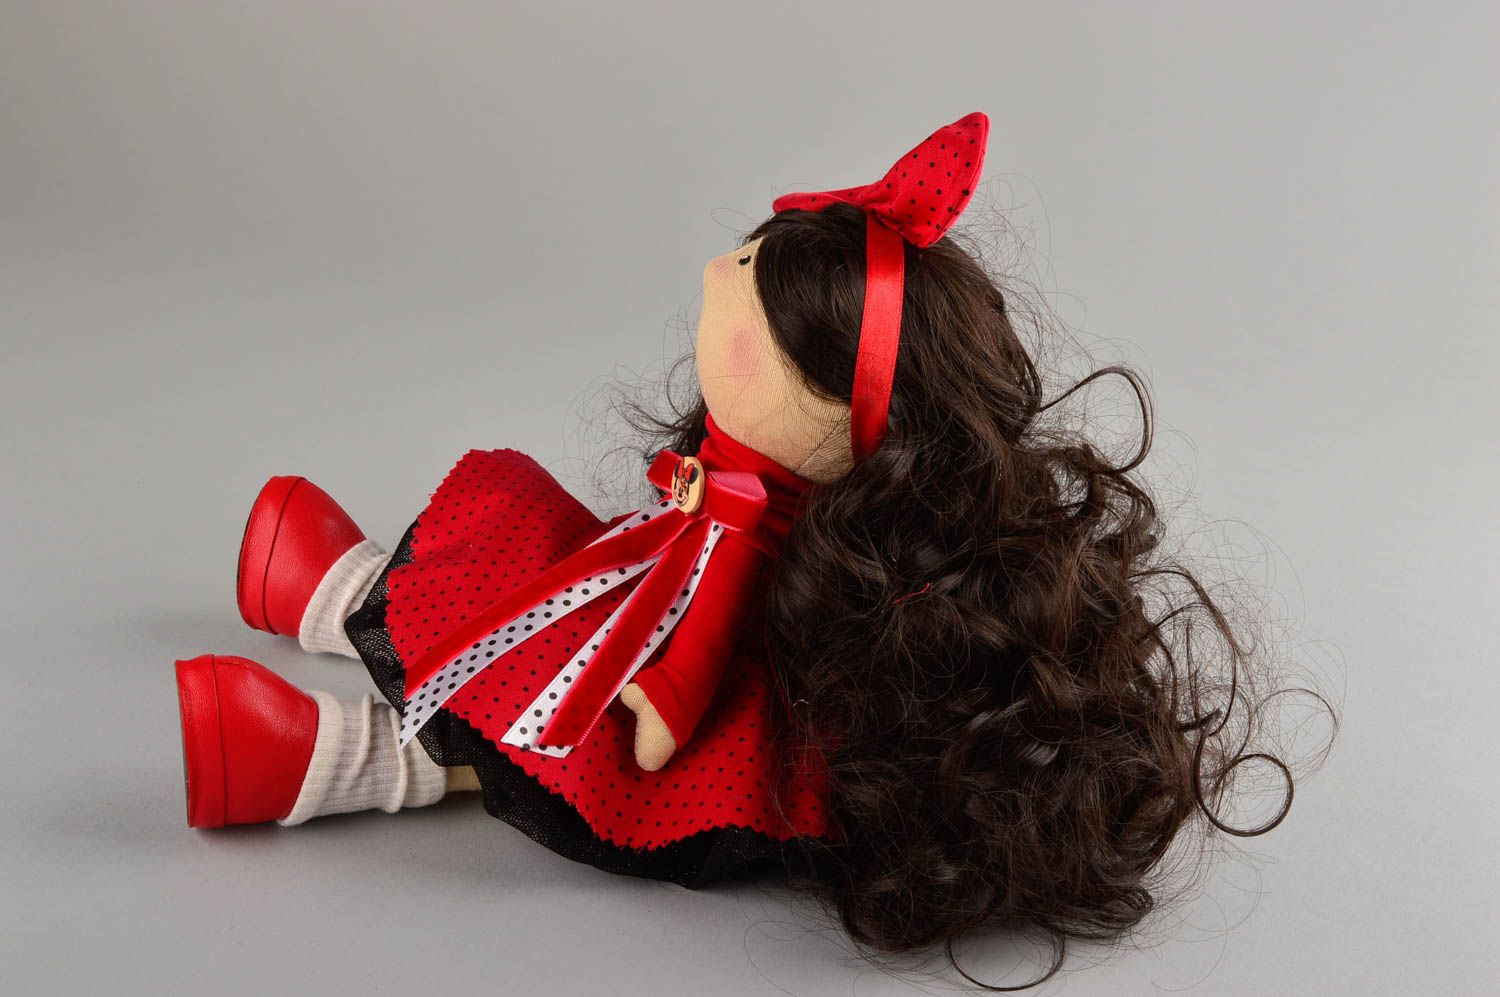 Designer doll bright handmade doll in red dress textile toy decorative use only photo 3